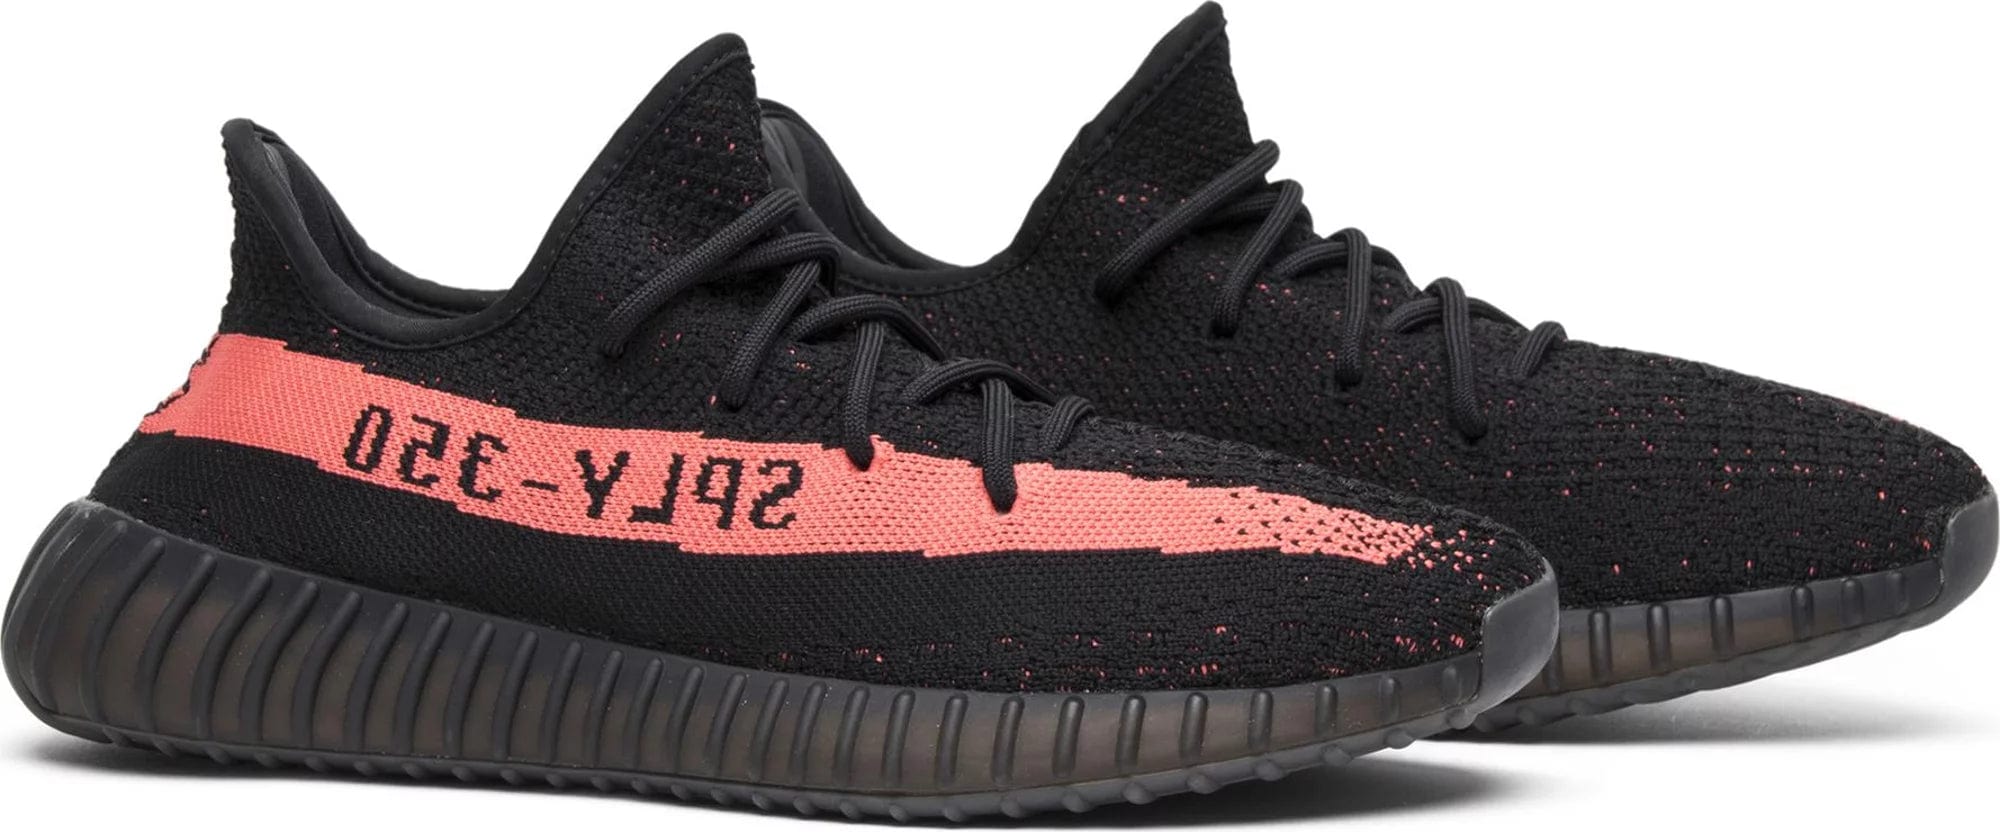 sneakers adidas Yeezy Boost 350 V2 Core Black Red